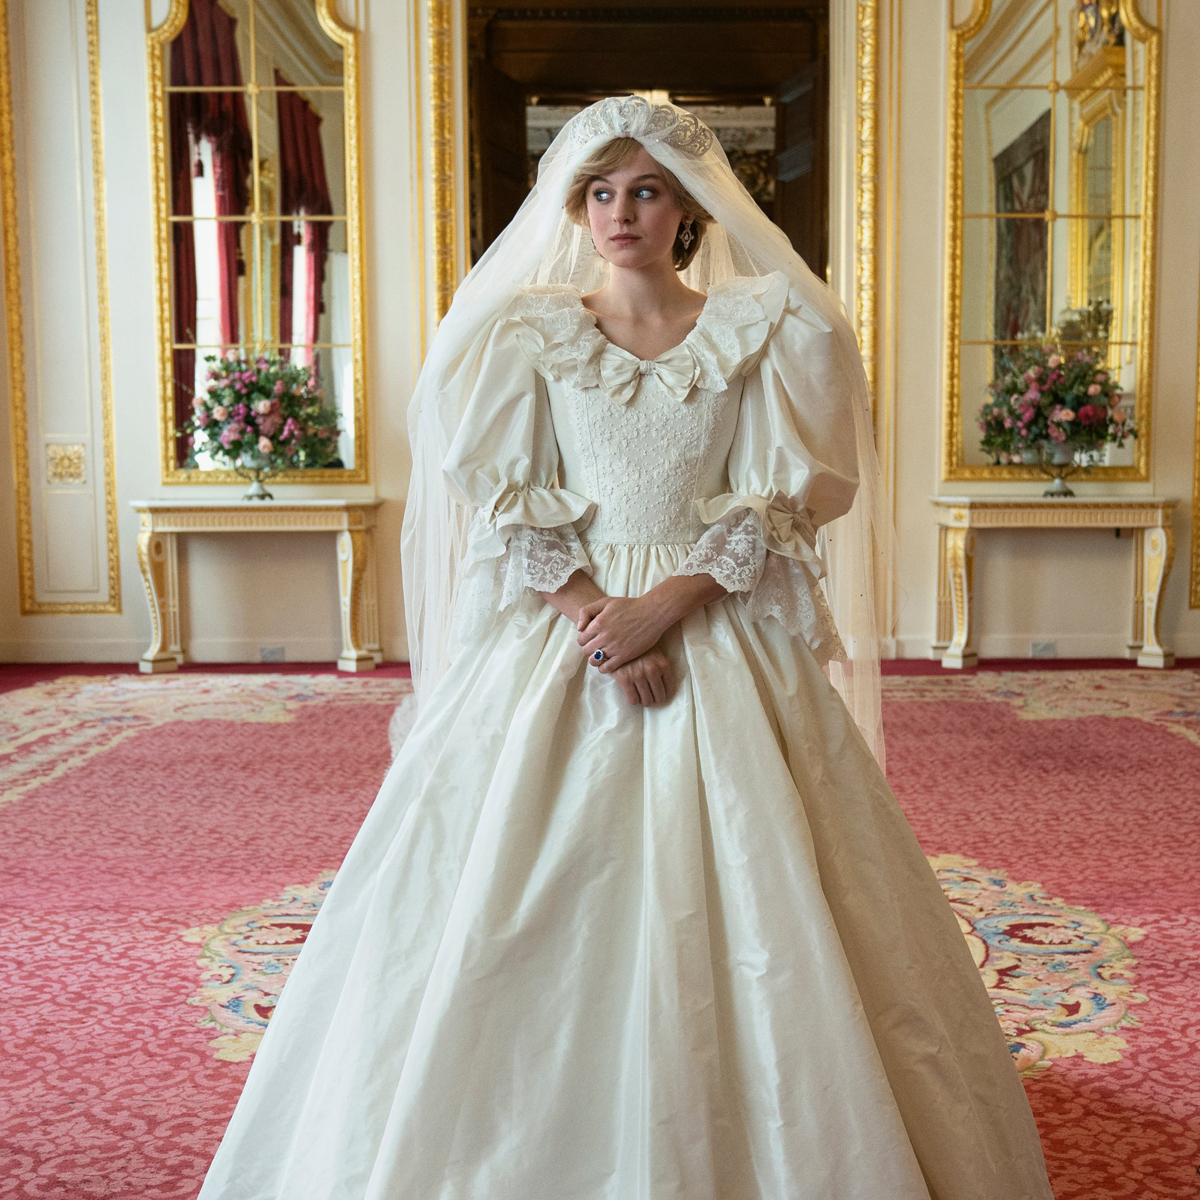 The Crown Released the First Photo of Diana's Wedding Dress - E! Online